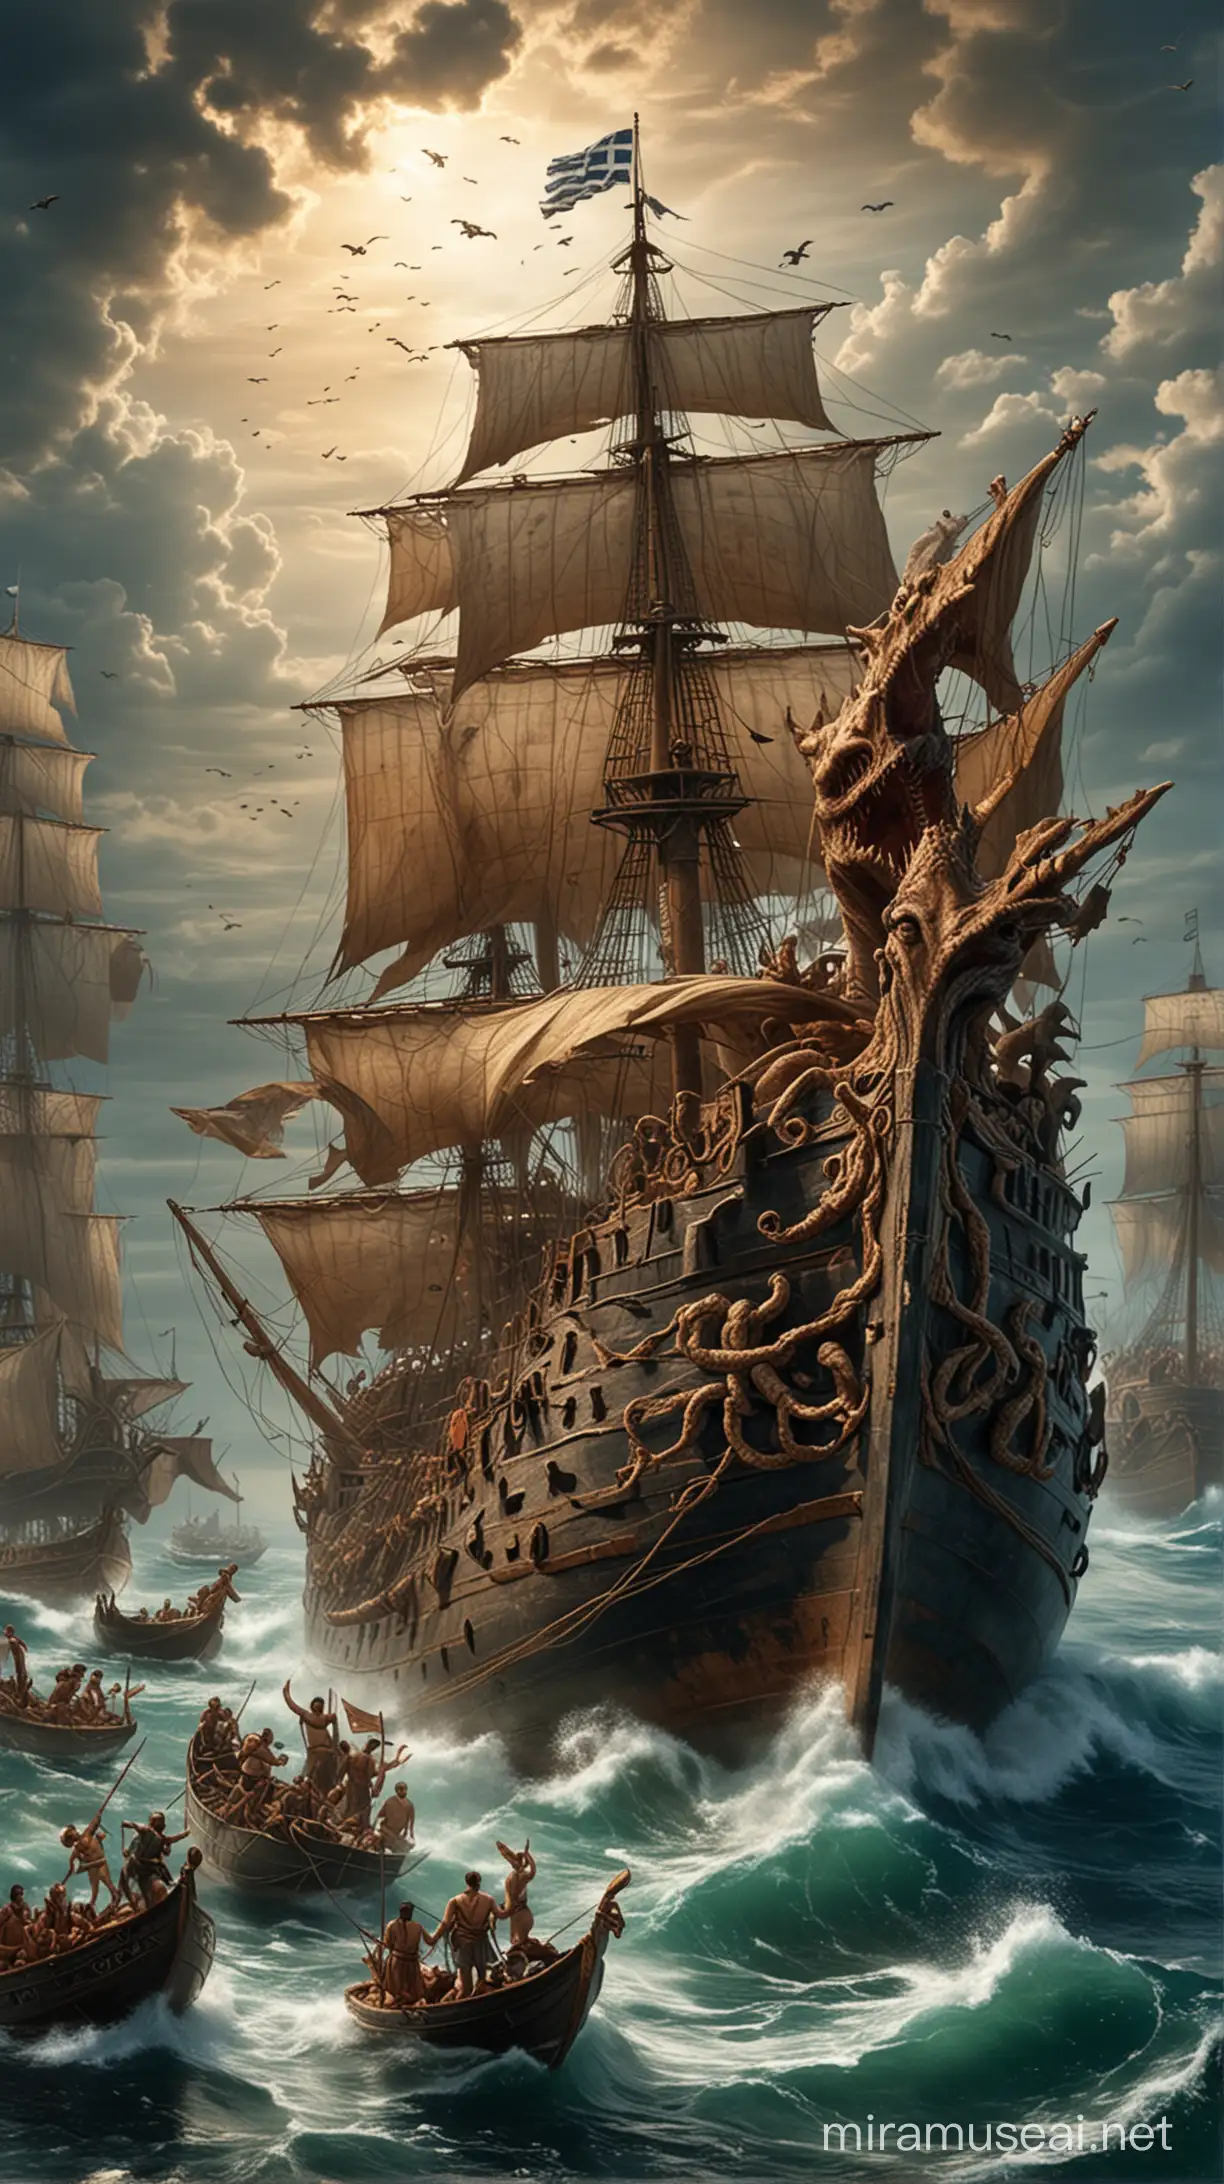 Greek Ship Surrounded by Mythical Monsters